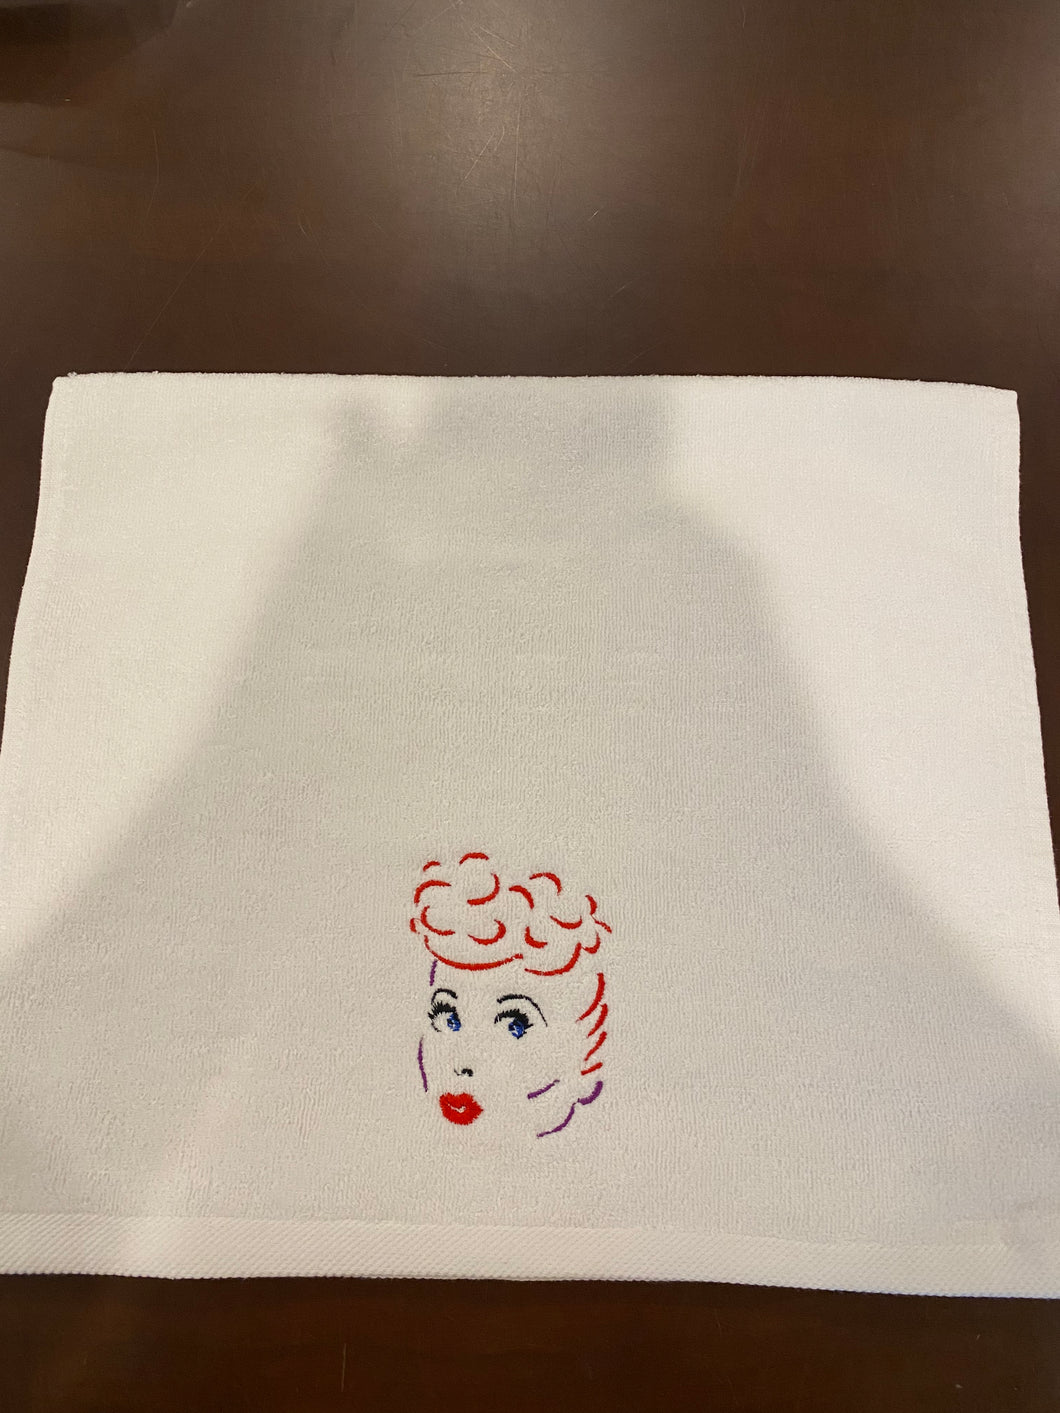 LUCILLE BALL SKETCH EMBROIDERED TOWEL